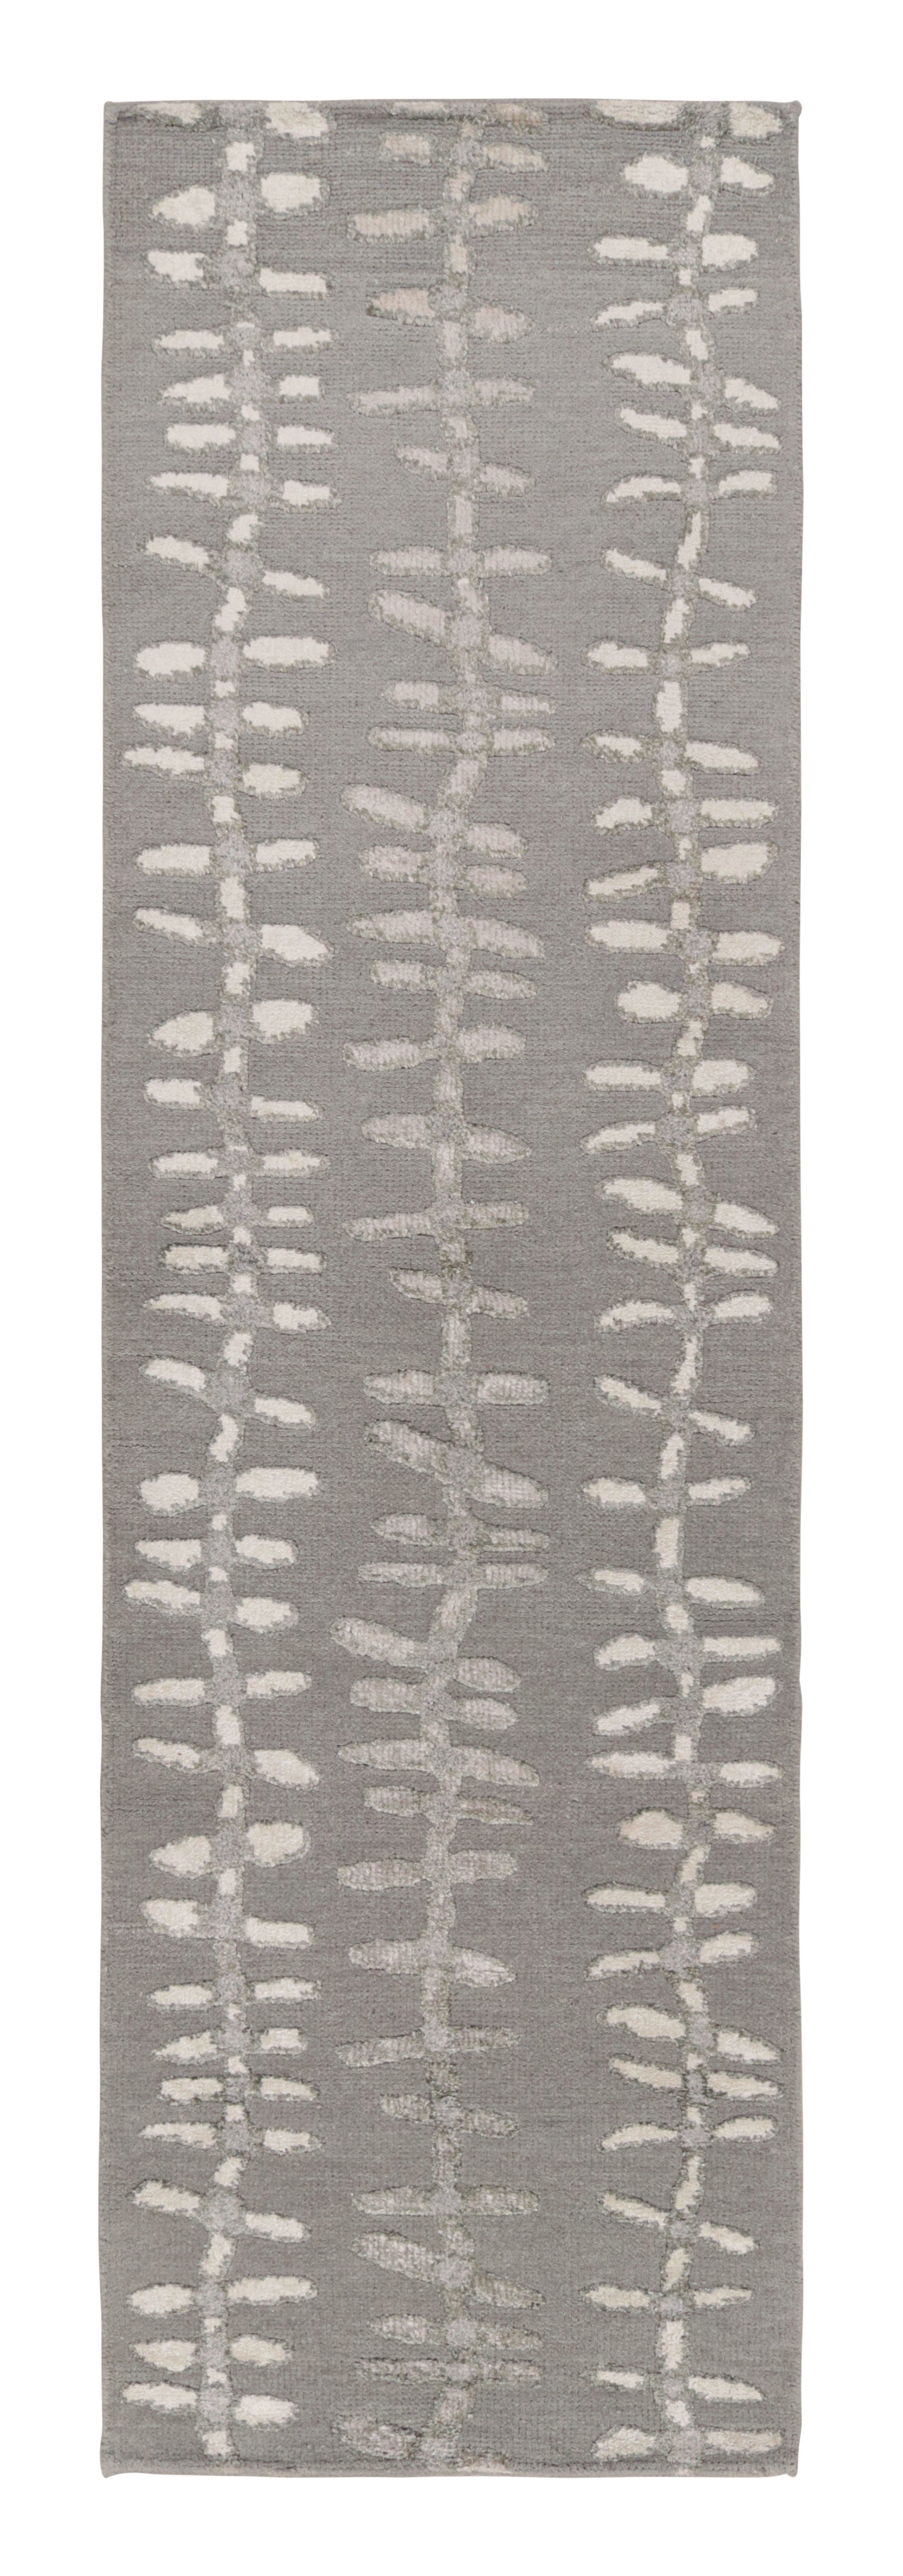 Rug & Kilim’s Scandinavian Runner Rug in Silver-Gray Tones with Floral Patterns  For Sale